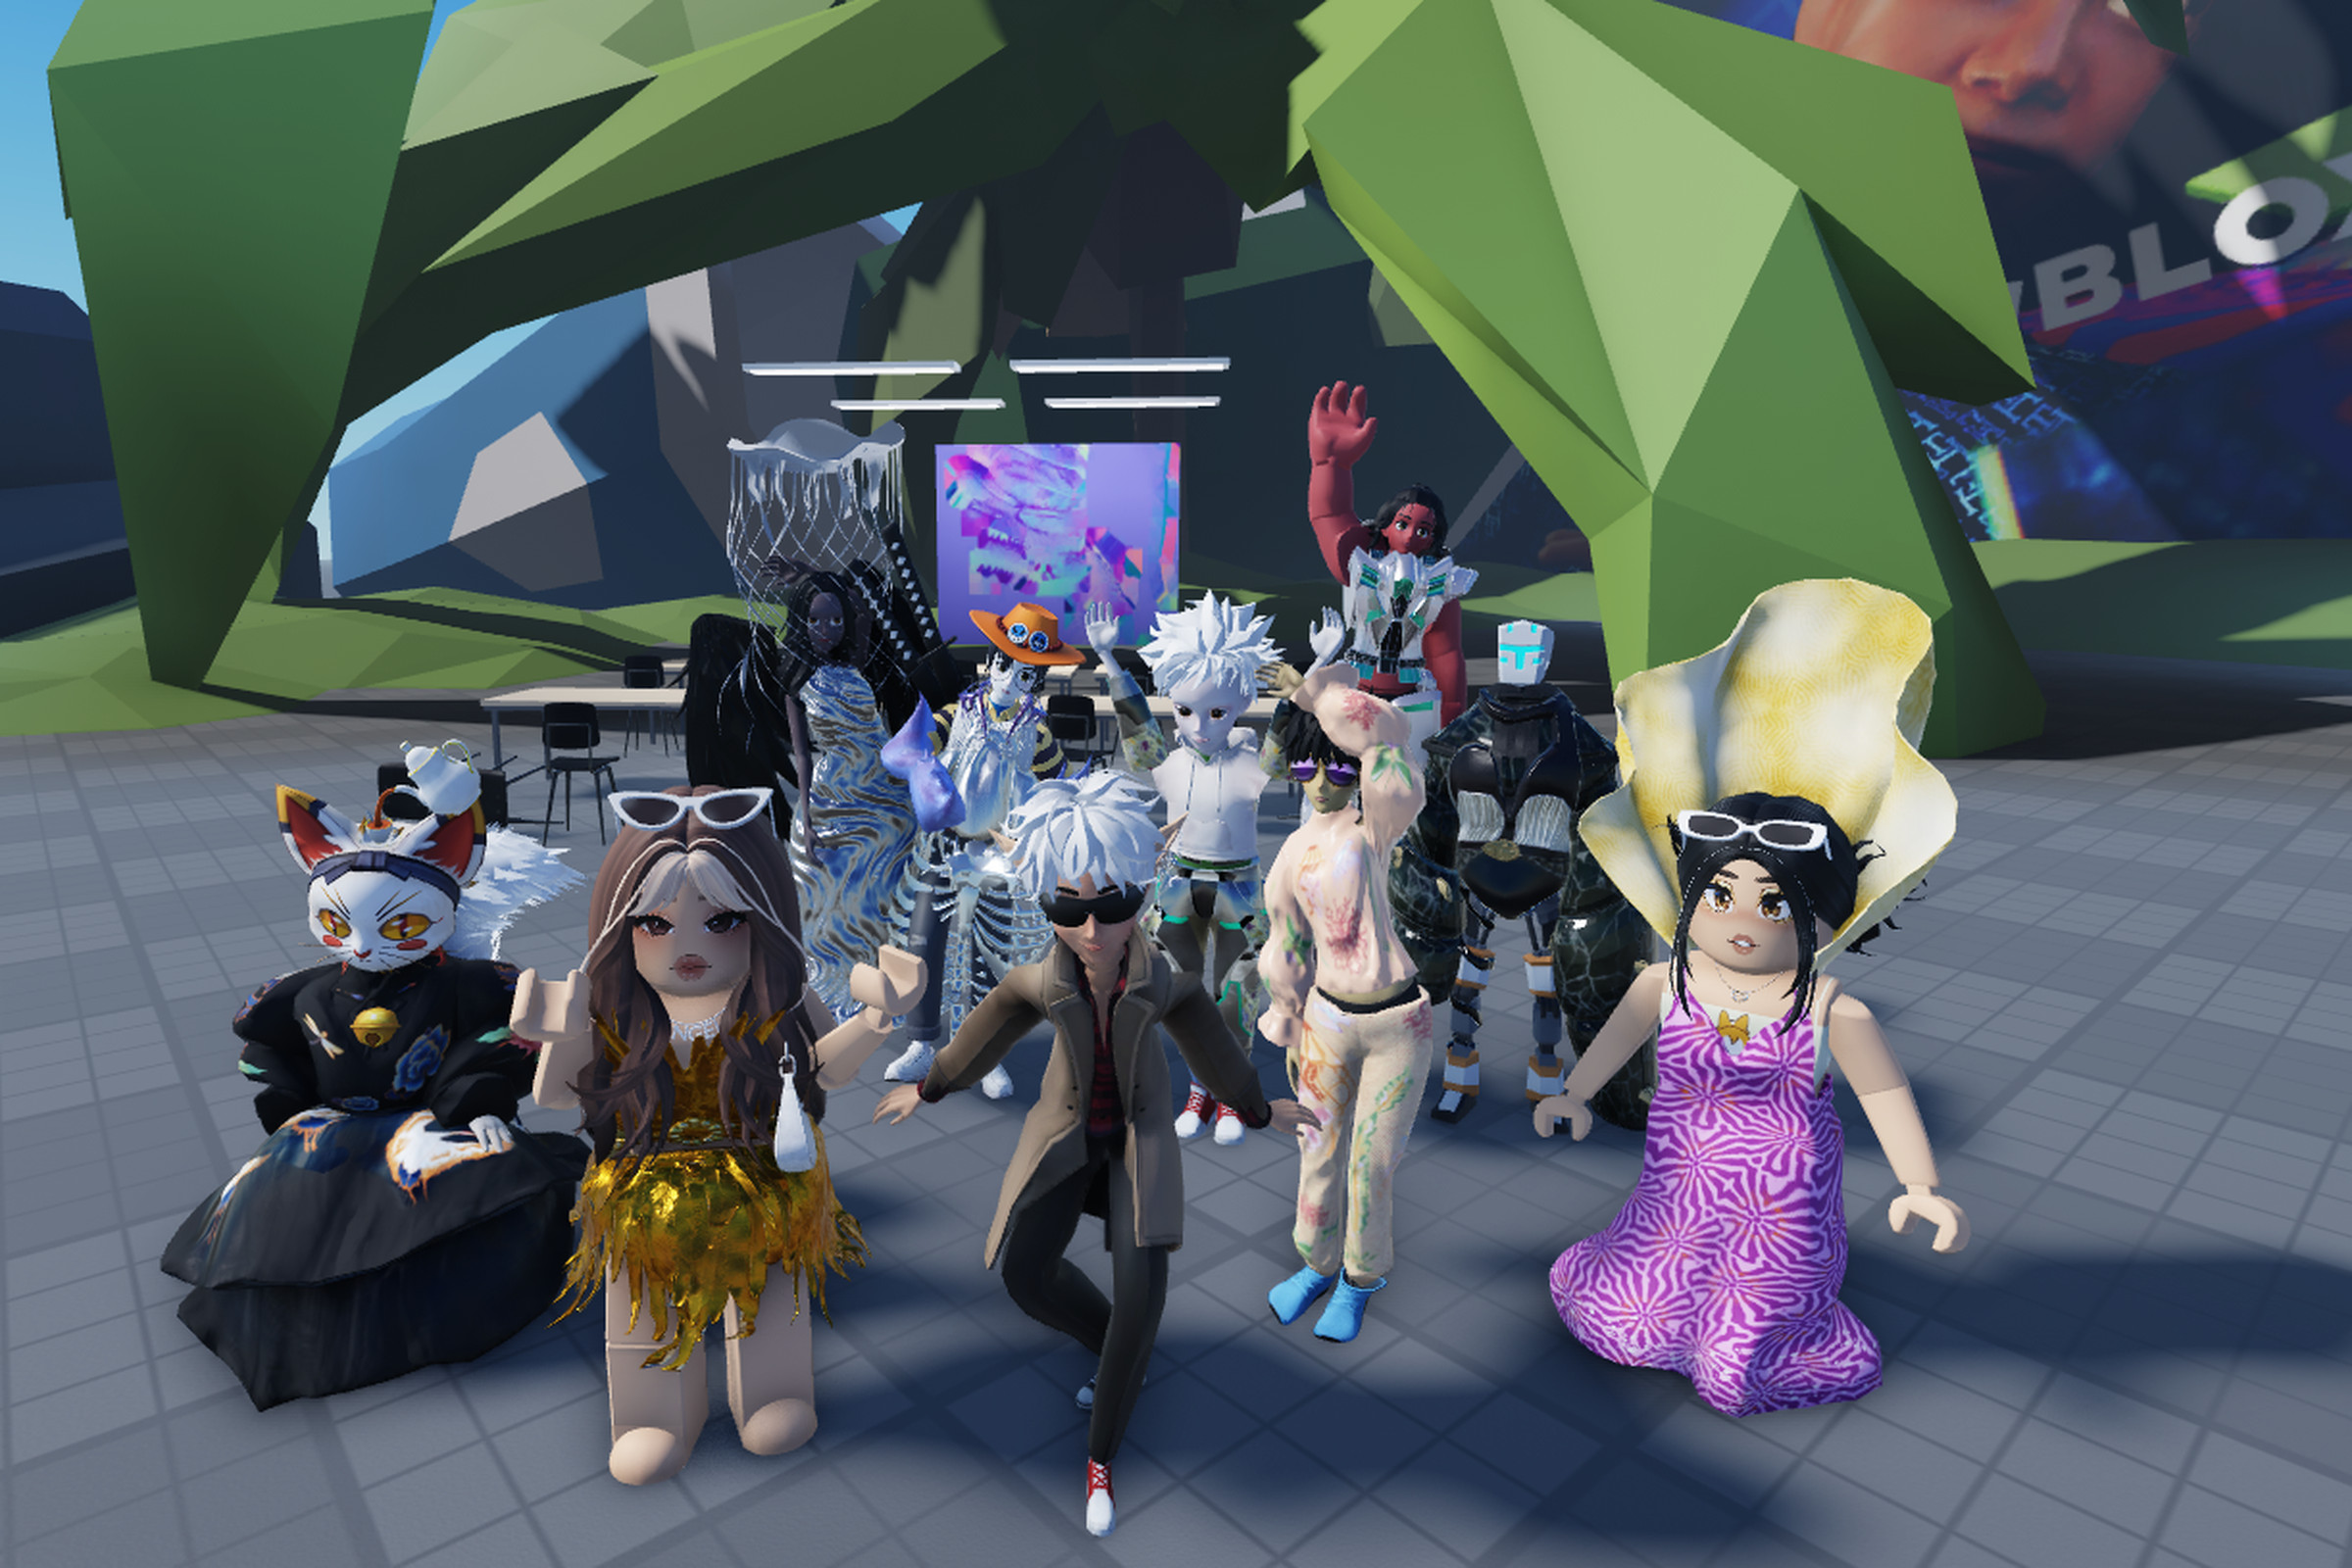 Virtual Roblox avatars designed by students from the Parsons School of Design. 